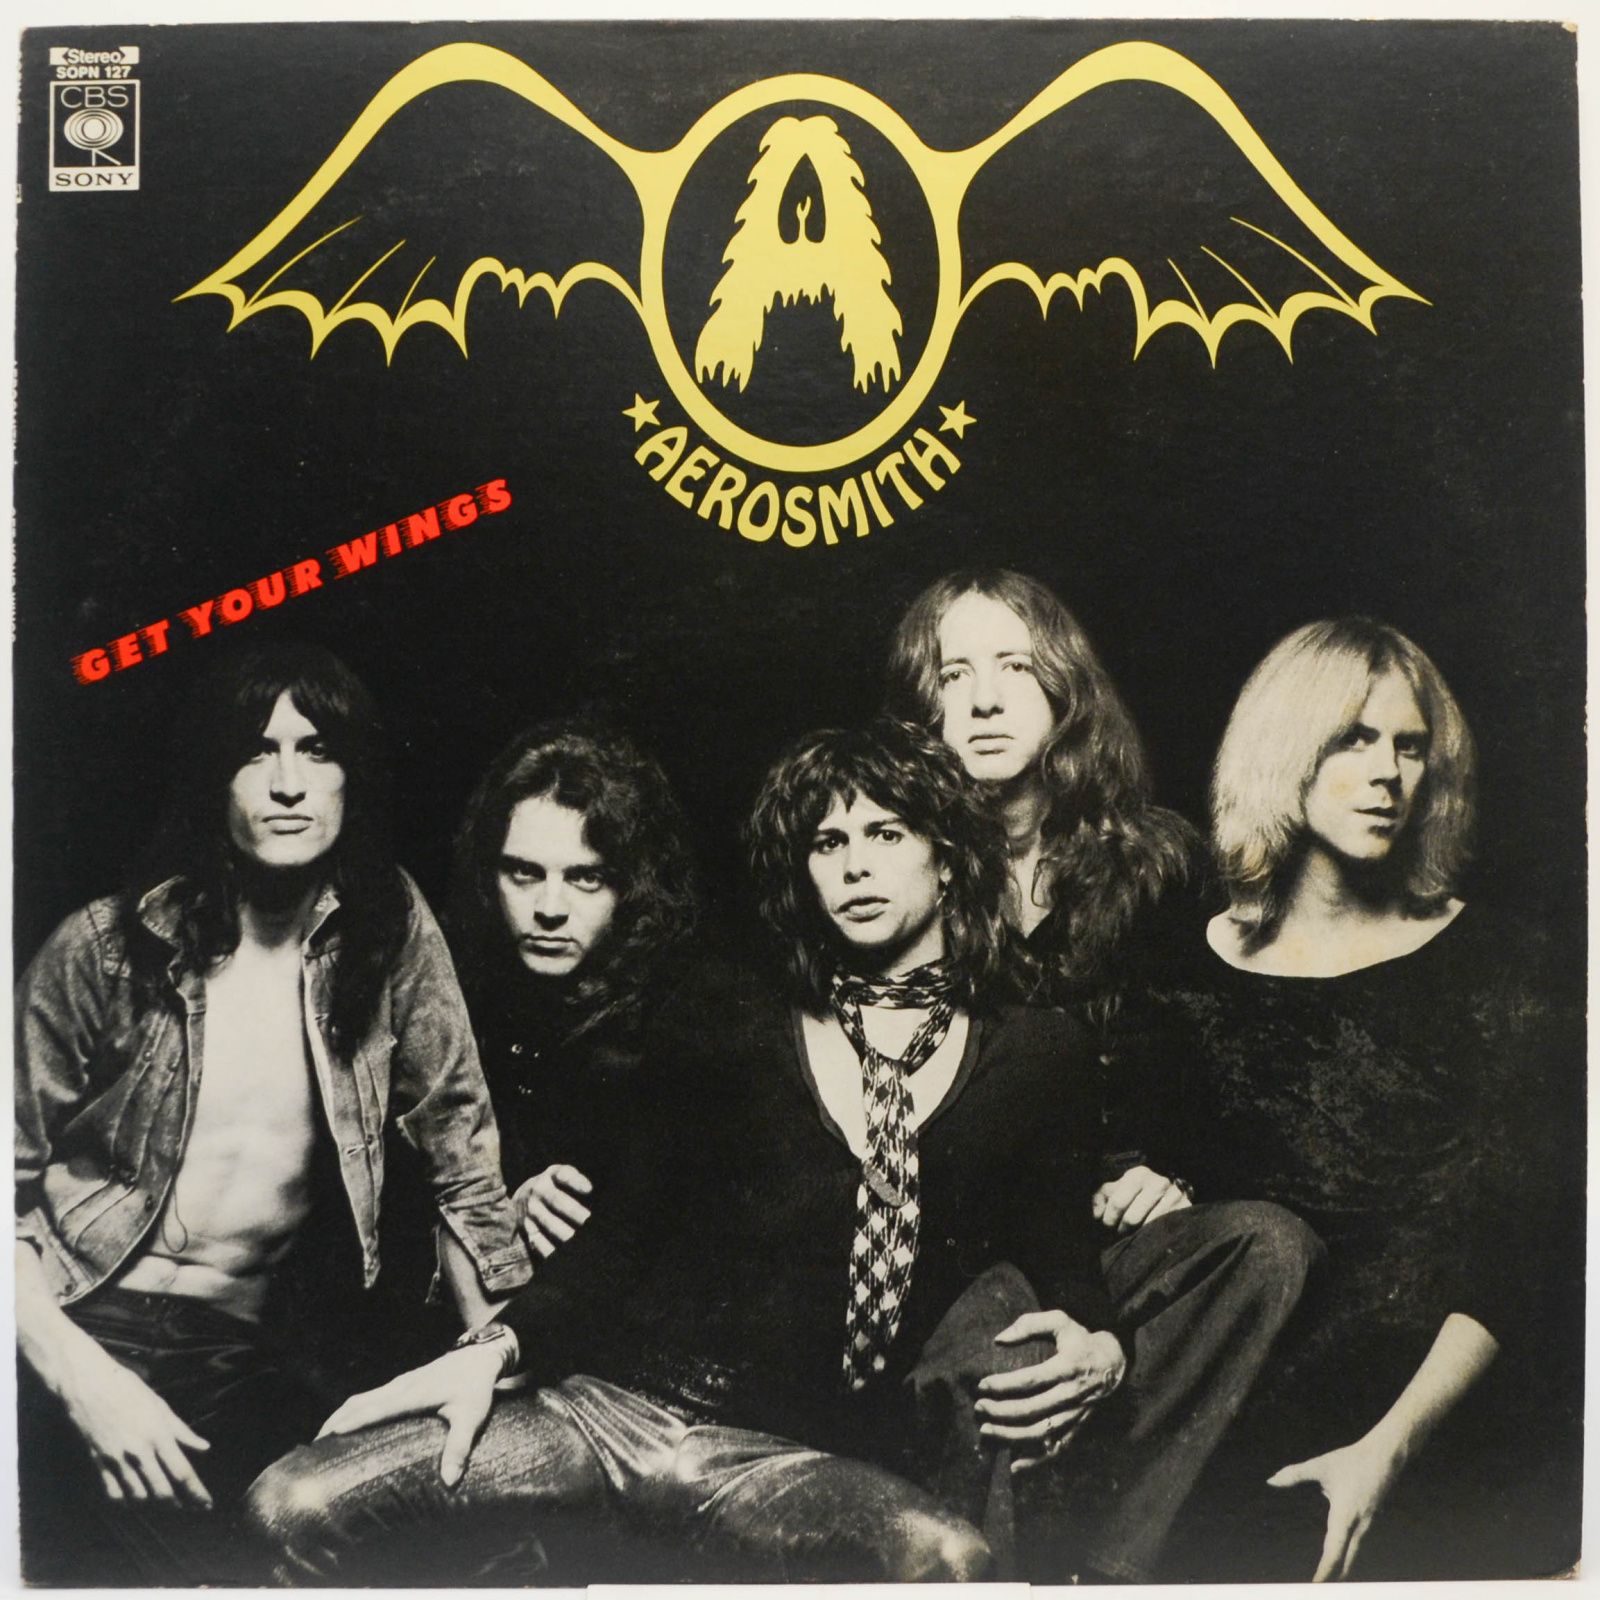 Get Your Wings, 1975